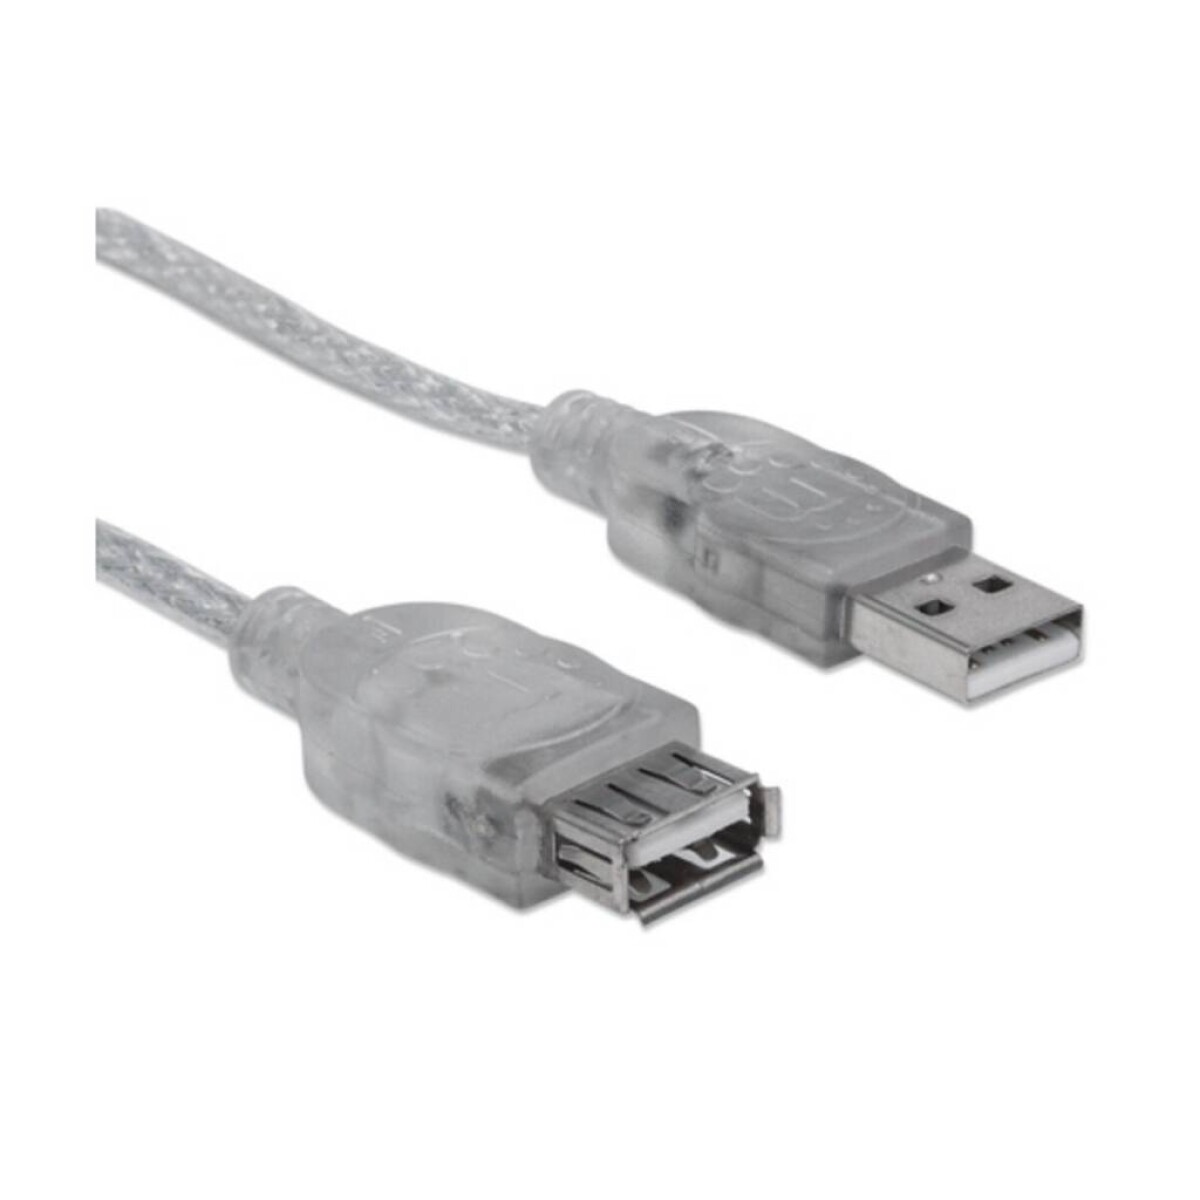 Cable USB 2.0 Extension 1,8 mts Manhattan - 3710 